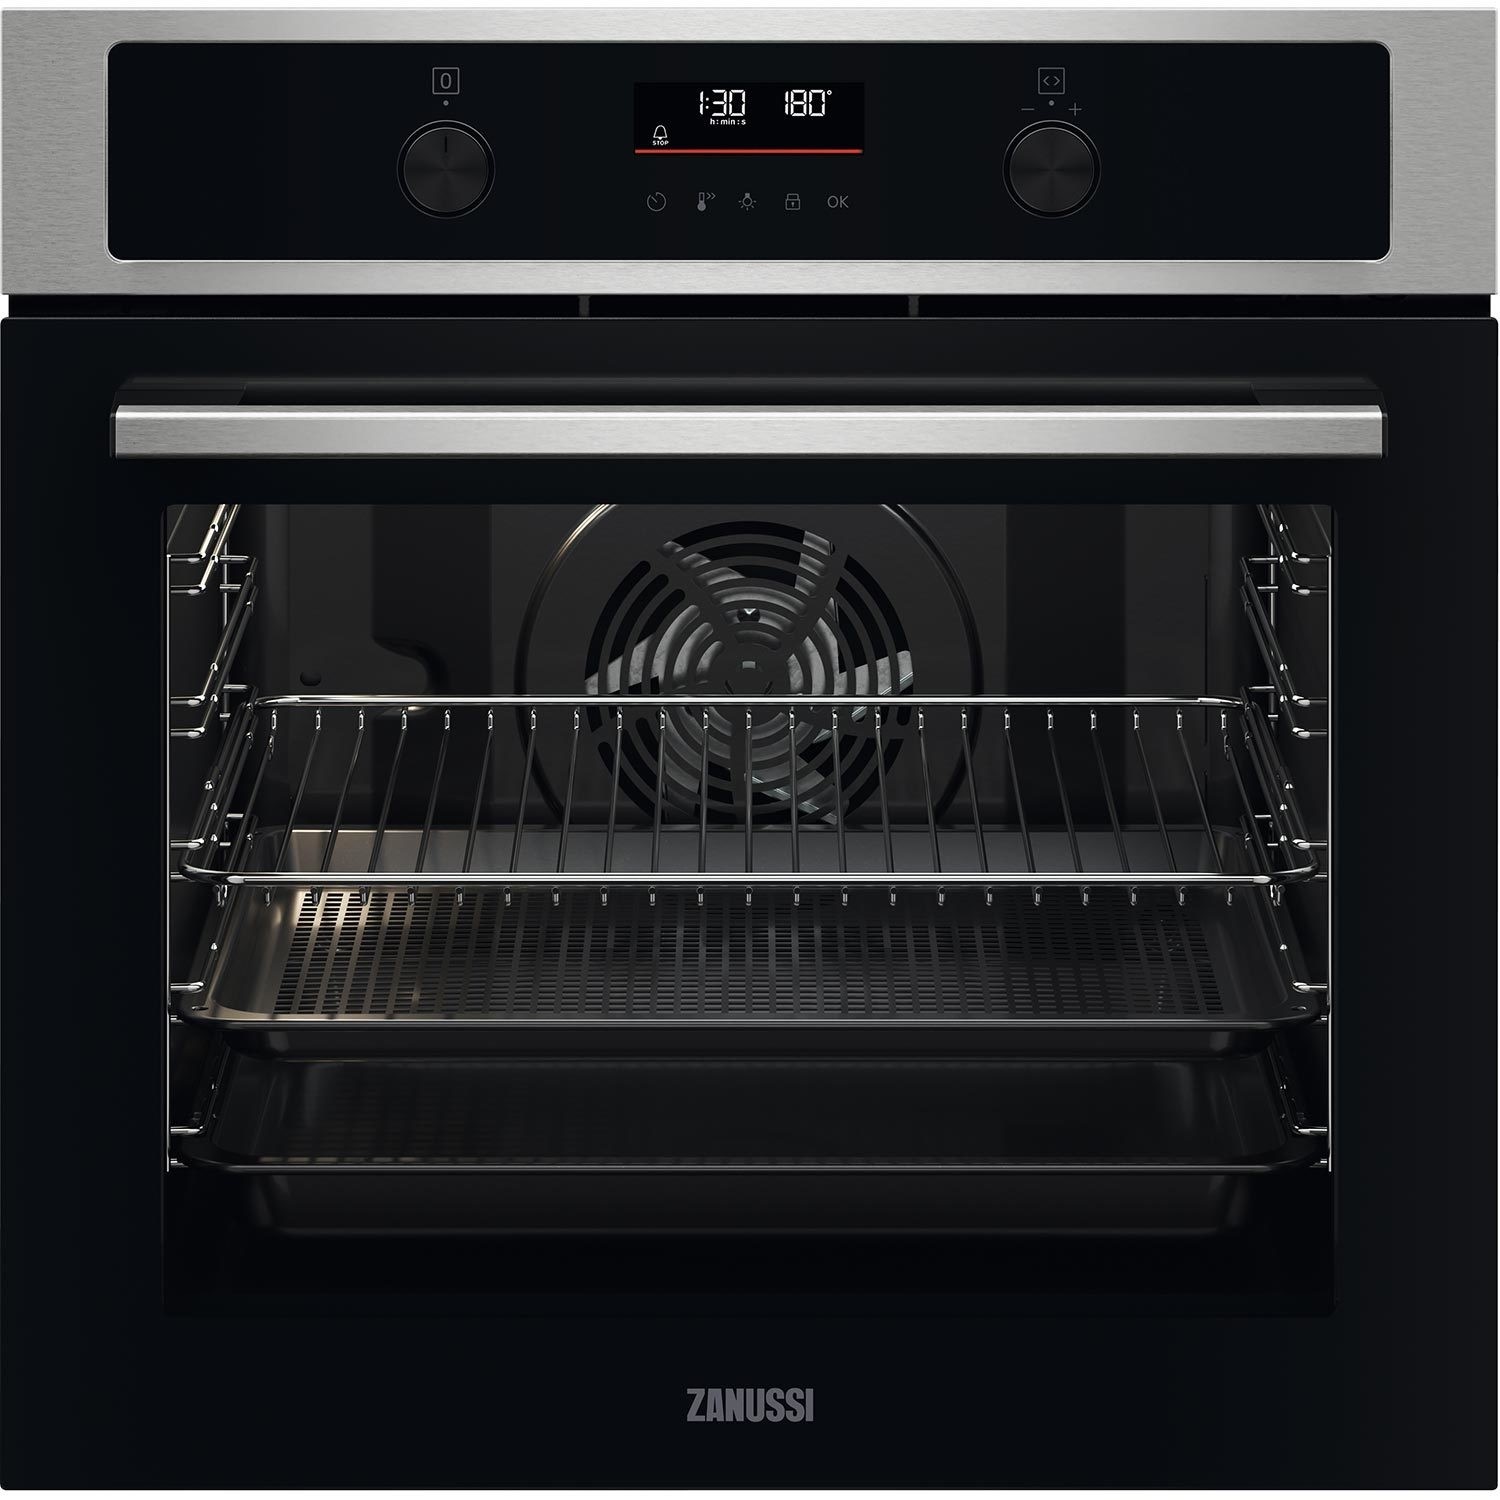 Photos - Other for Computer Zanussi Series 60 Electric Single Oven - Stainless Steel ZOPNA7XN 